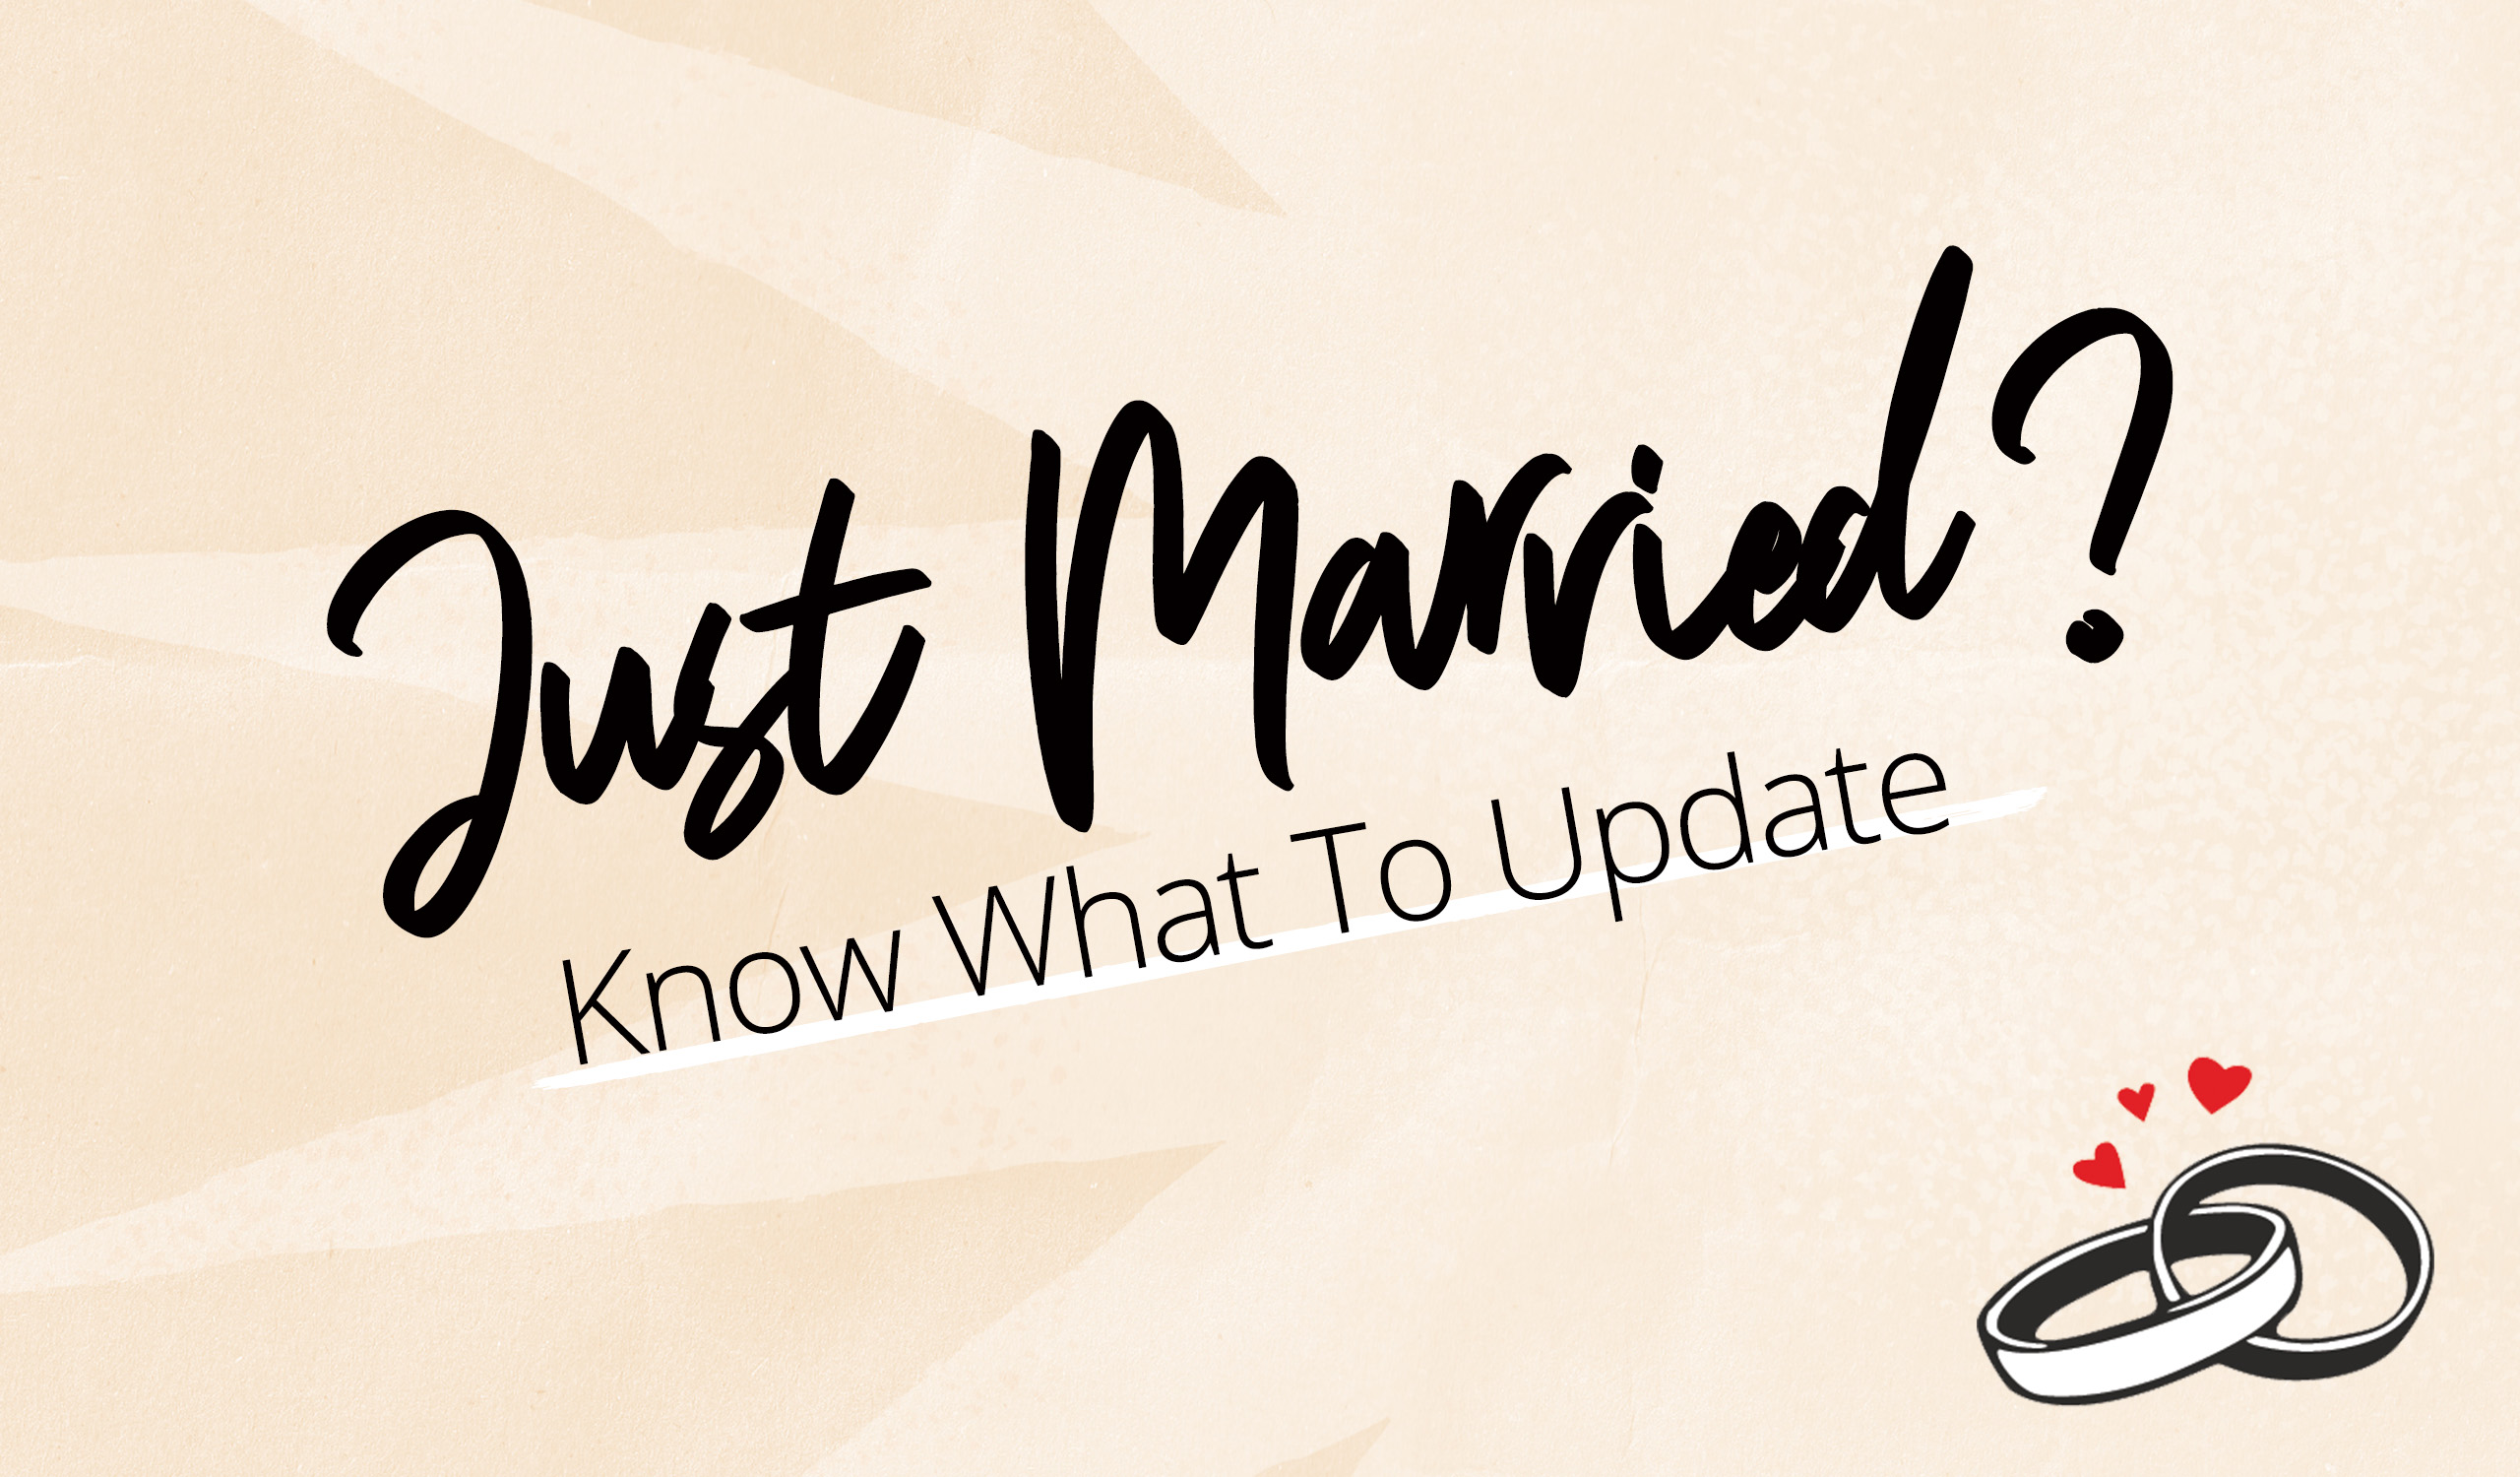 What Documents Do I Need to Update When I Get Married? 